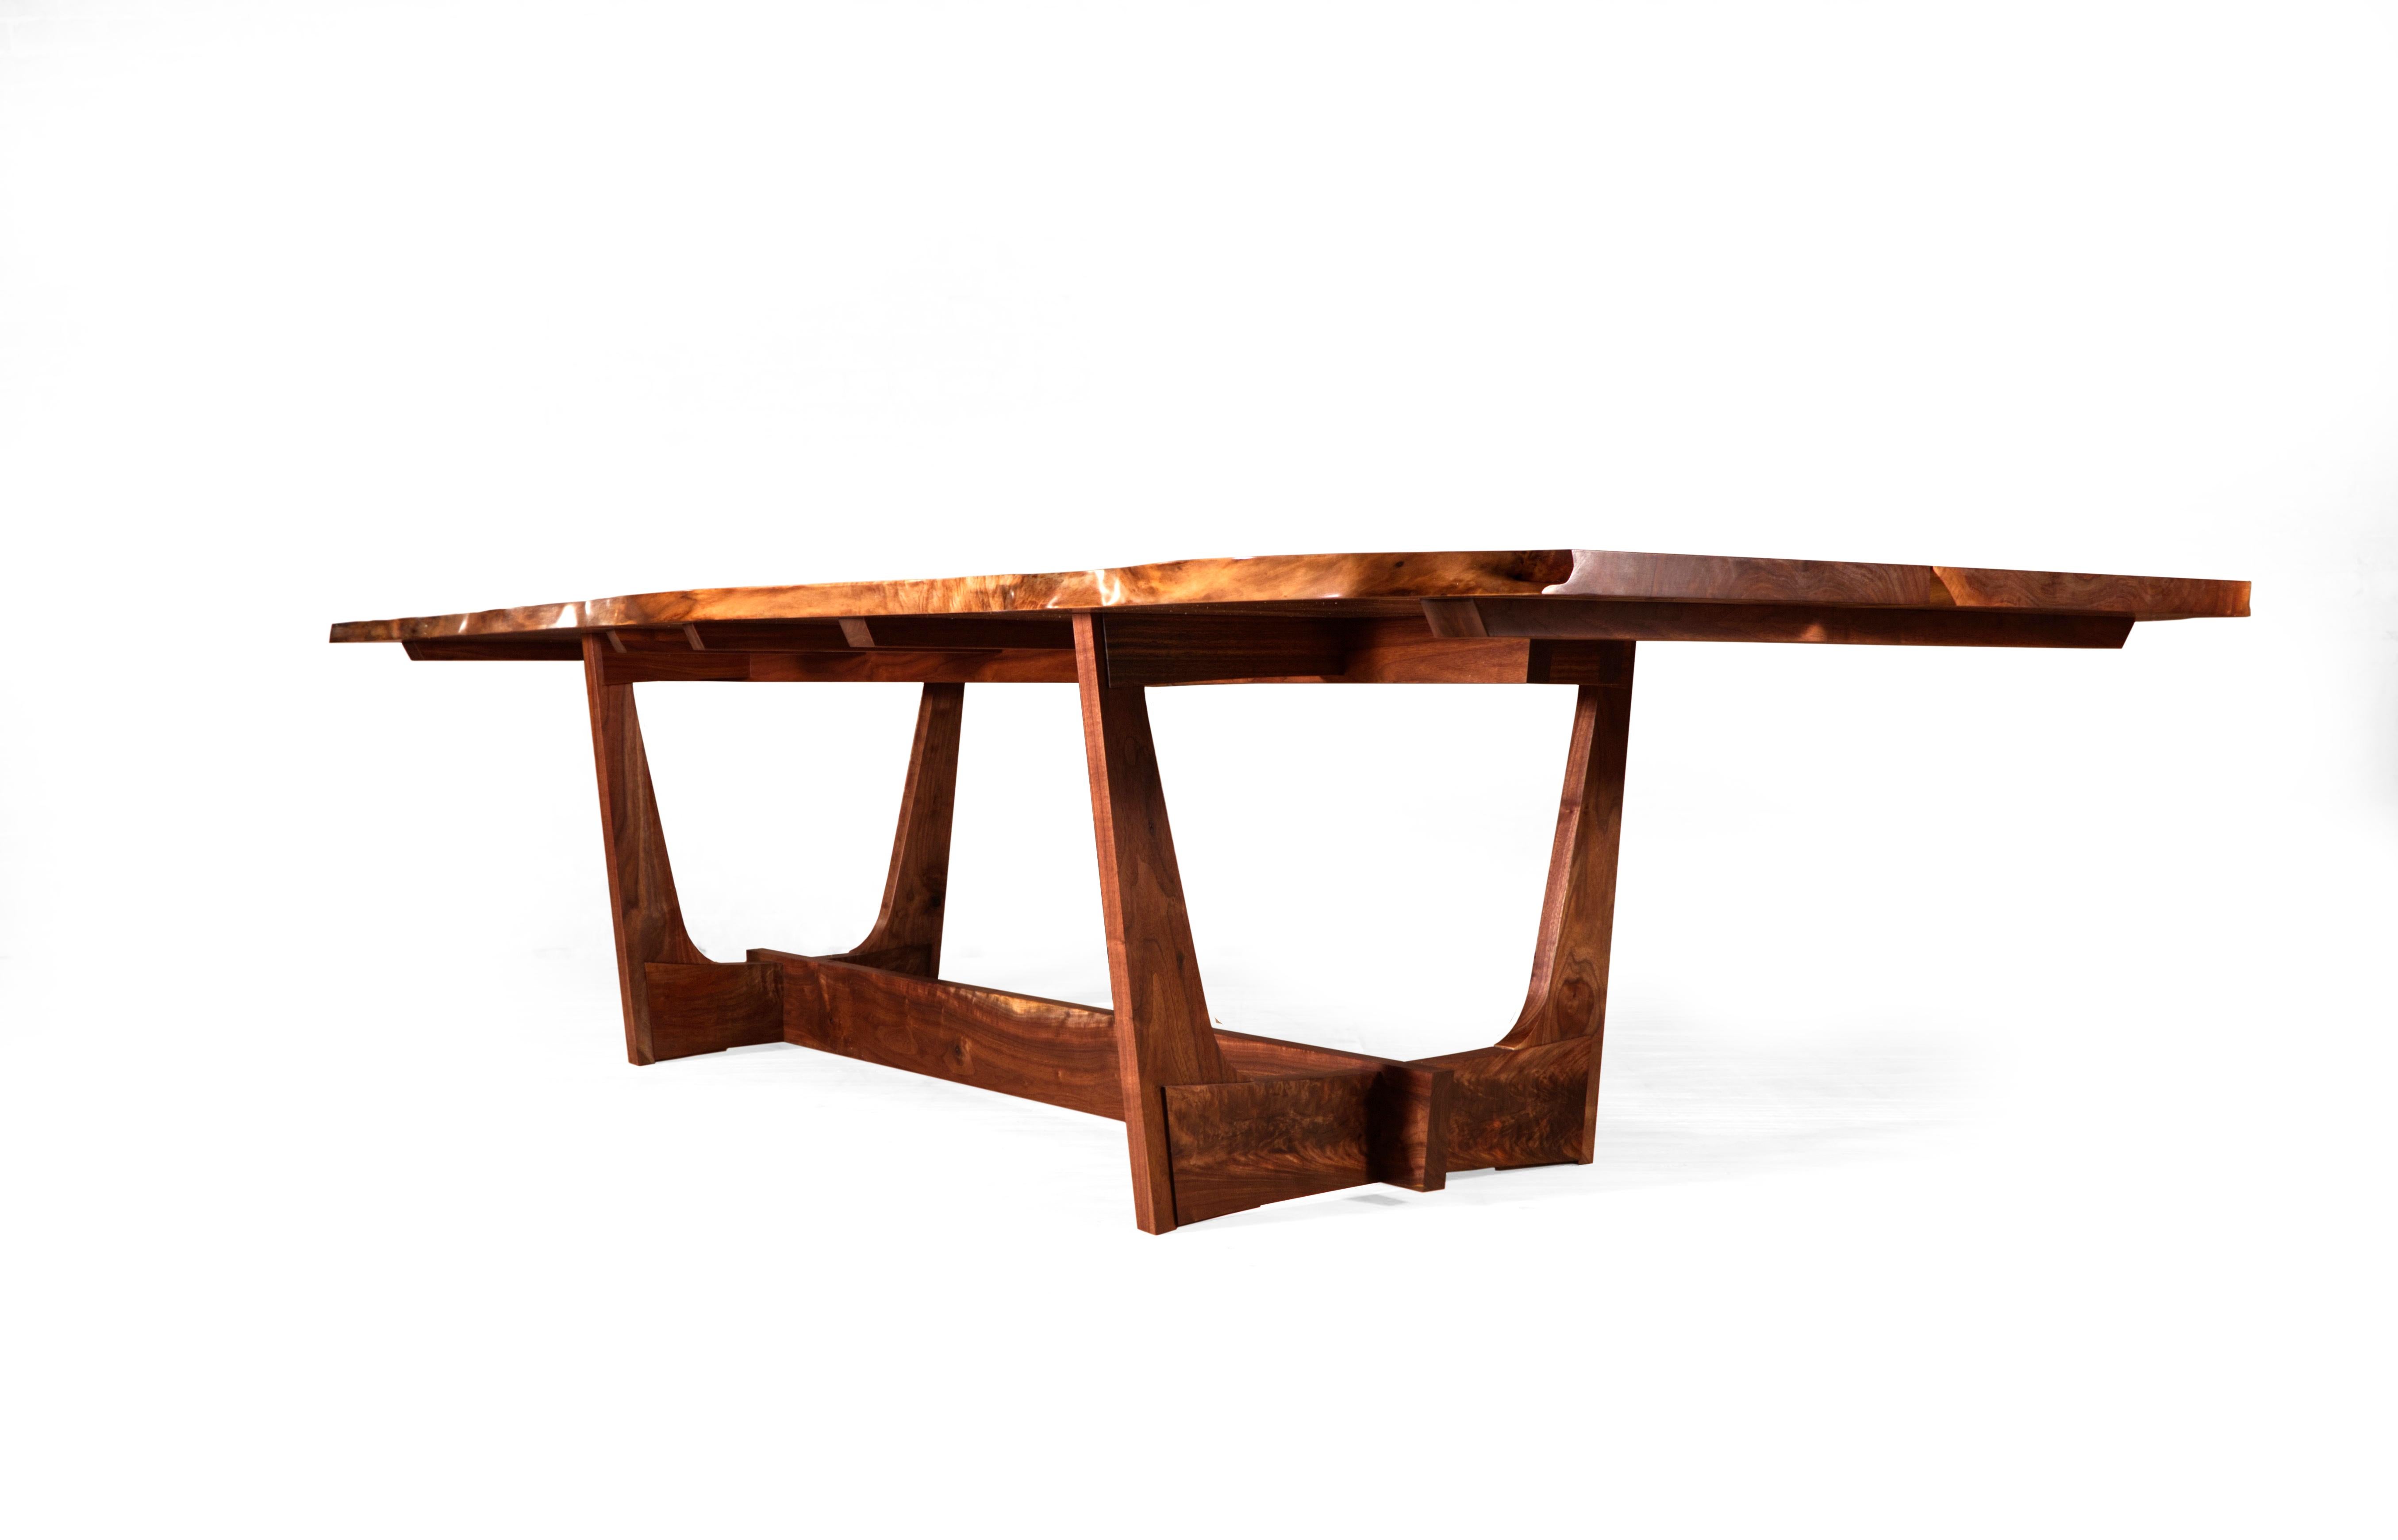 The Lake Tahoe table is a testament to fine craft. Designed around the principles of hand-cut joinery, such as large bridle joints and butterfly keys, the table's simple form highlights both the wood selection and skilled craftsmanship. 

The